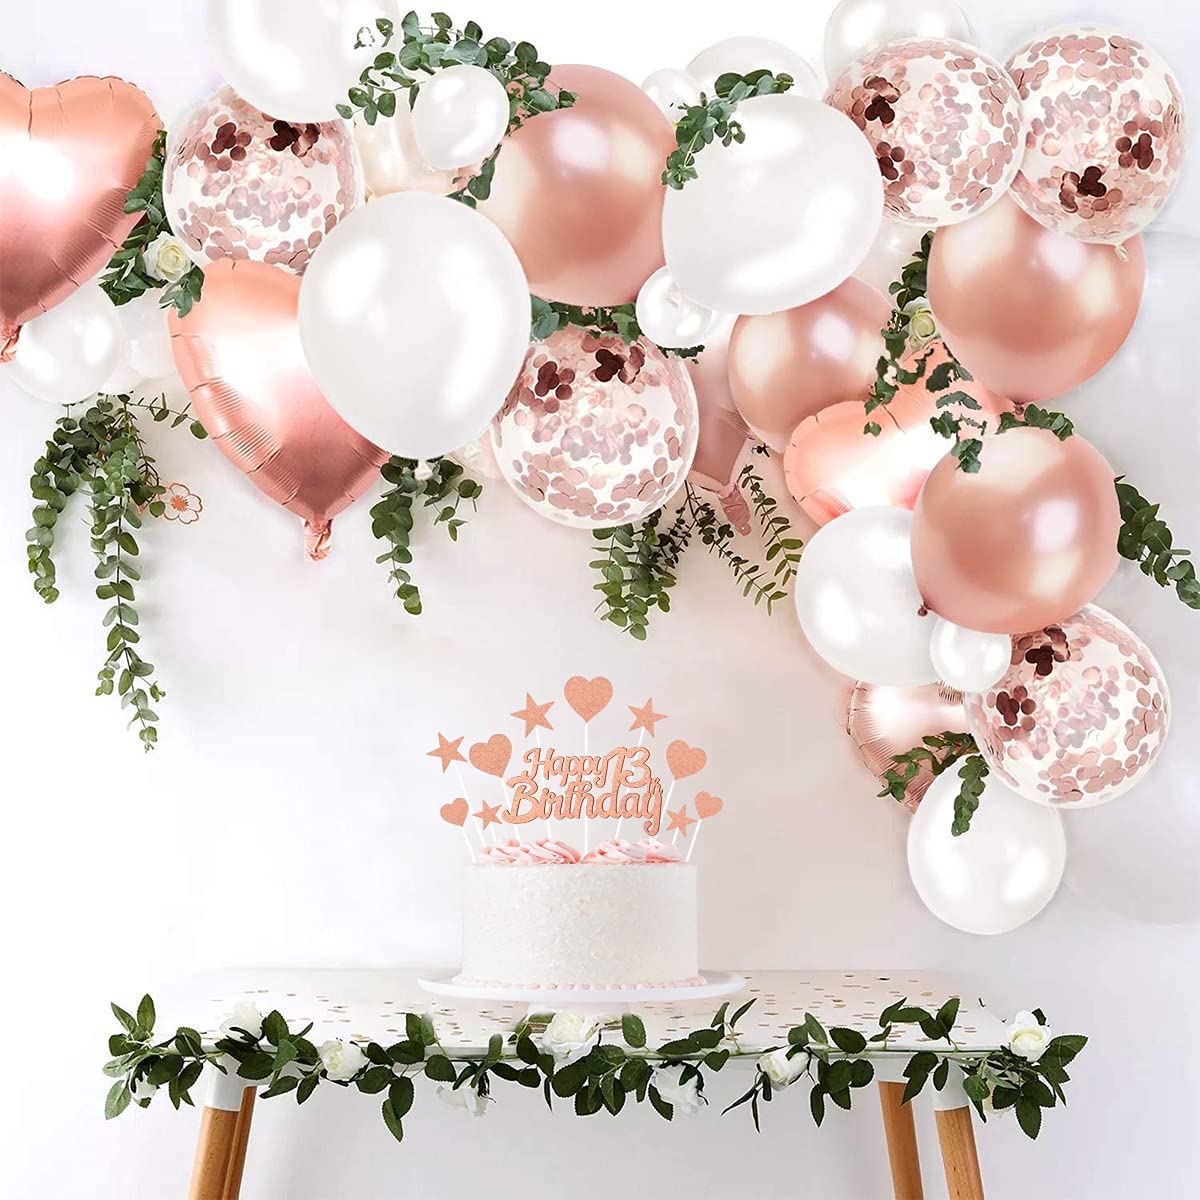 Humairc 13th Rose Gold Cake Decorations Happy Birthday Cake Topper for Girls Women Kids, Cupcake Topper for Shiny Rose Gold Birthday Party Cake Decorating